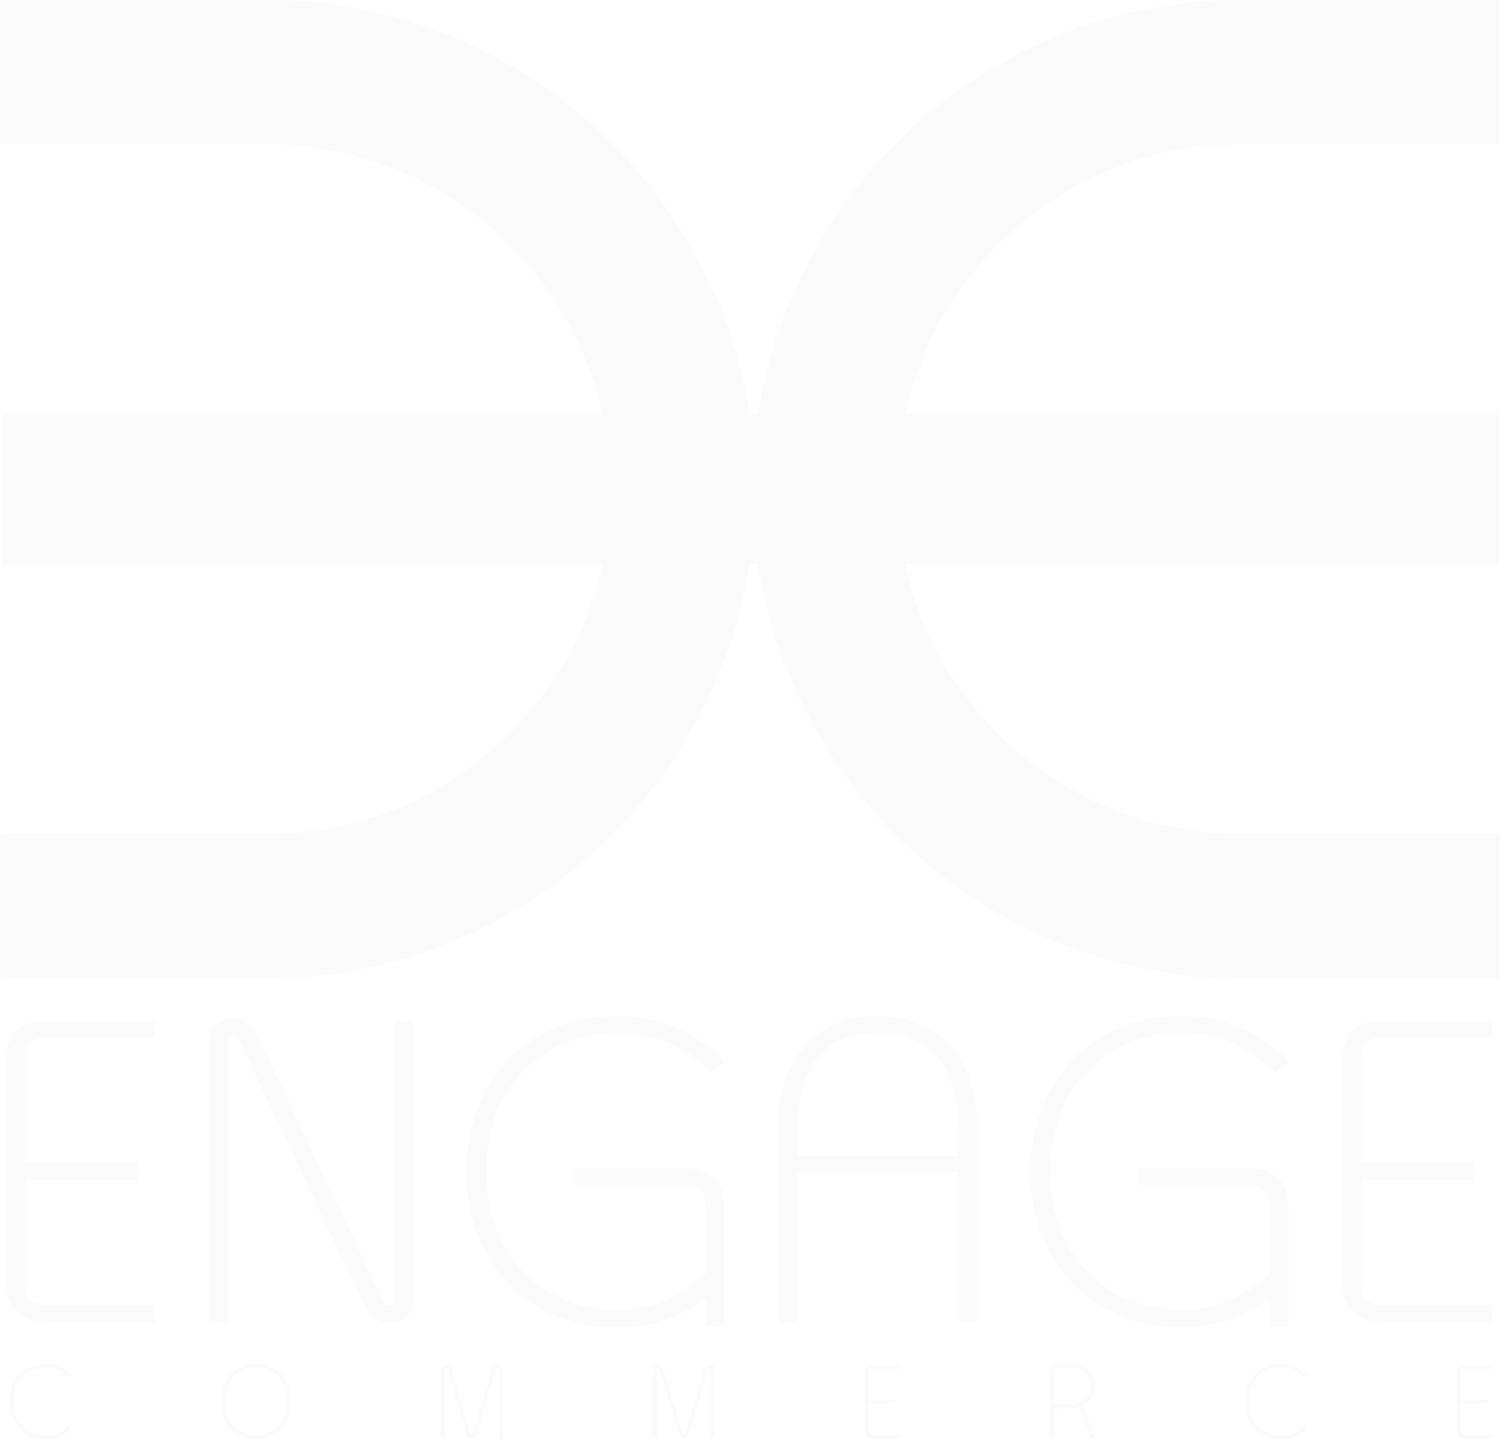 Engage Commerce - Building Shopify Brands one Spark At A Time